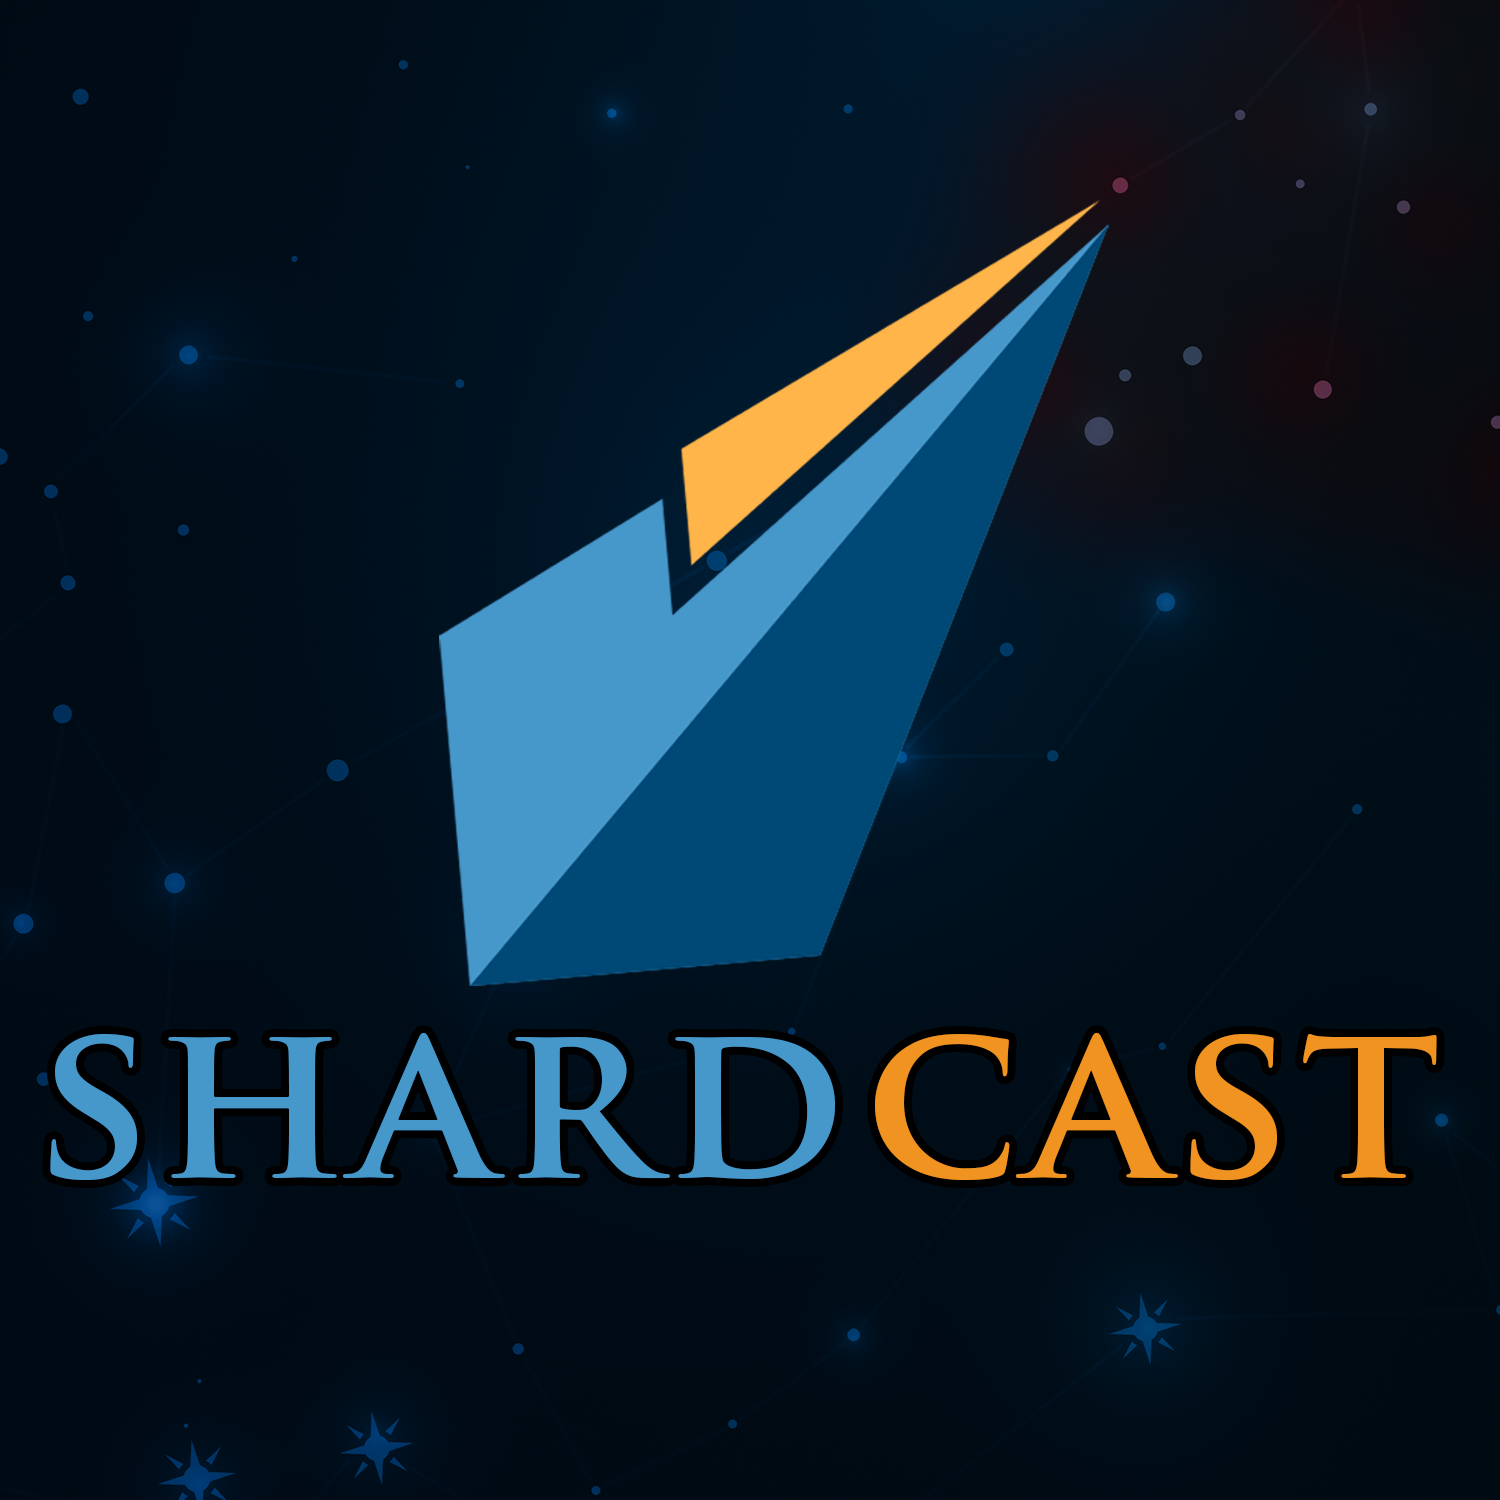 More information about "Shardcast: Mistborn Era 3 Title, Dragons, & More with Brandon Sanderson"